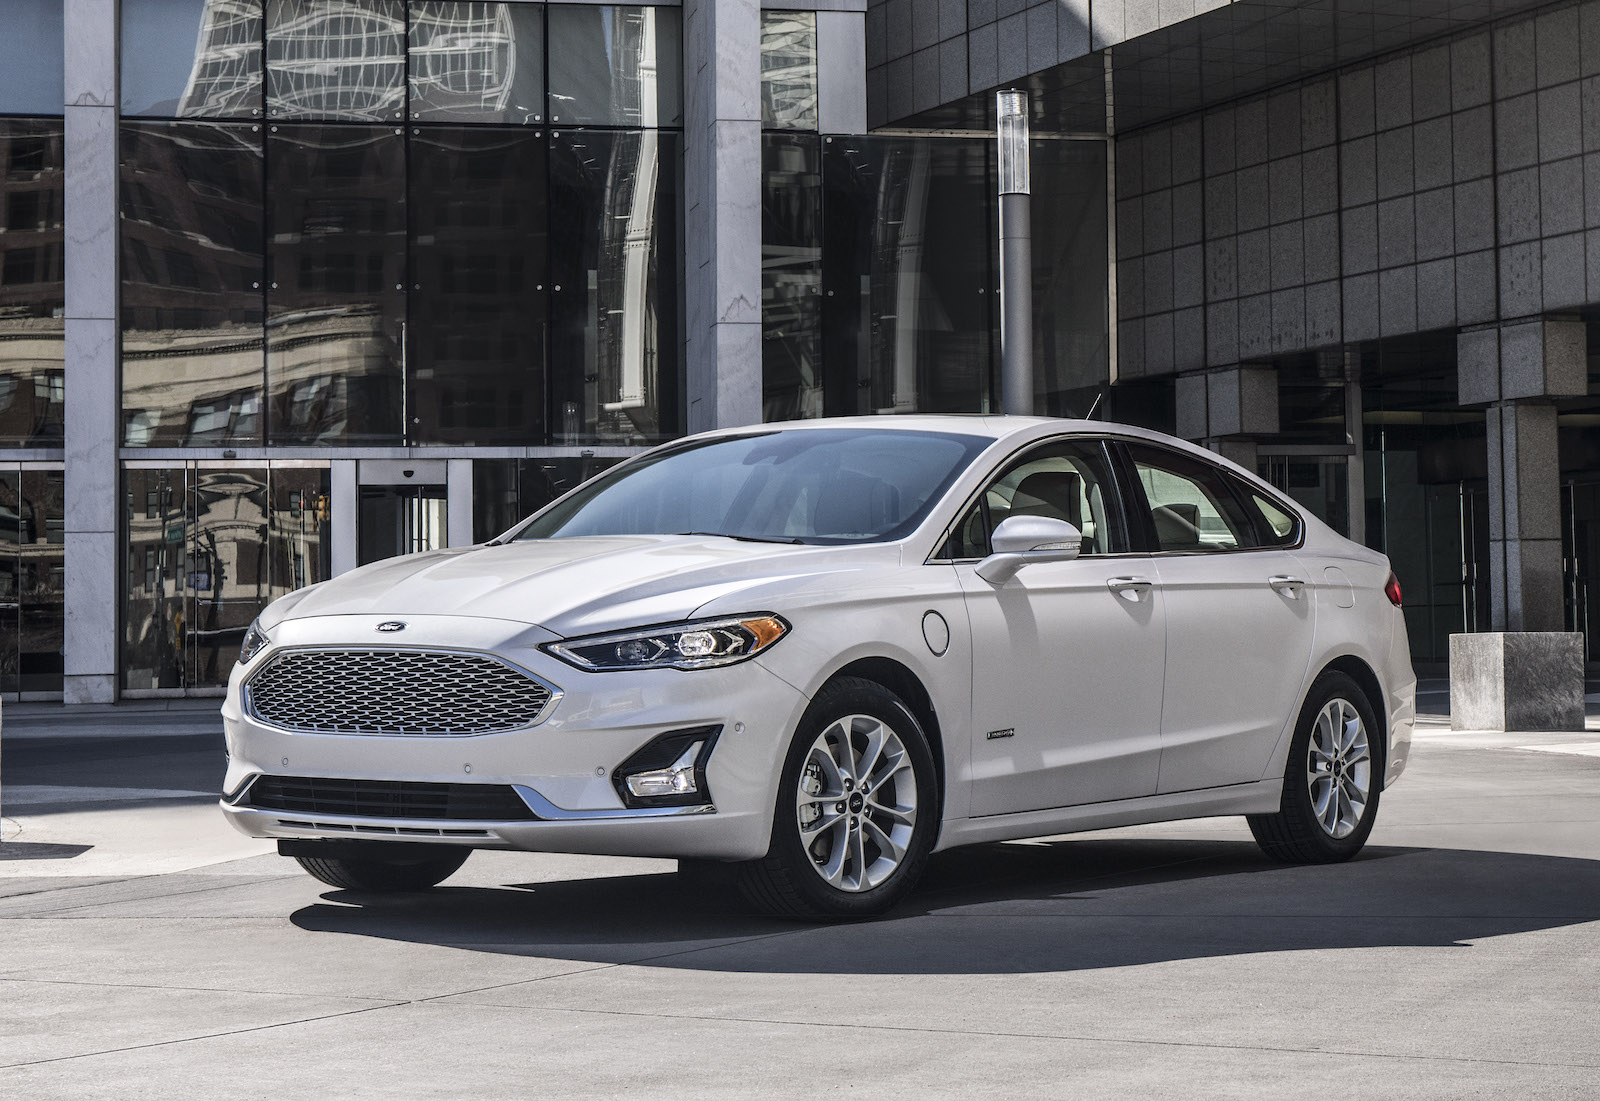 End of an Era at Ford as Last Fusion Rolls Off Production Line - The